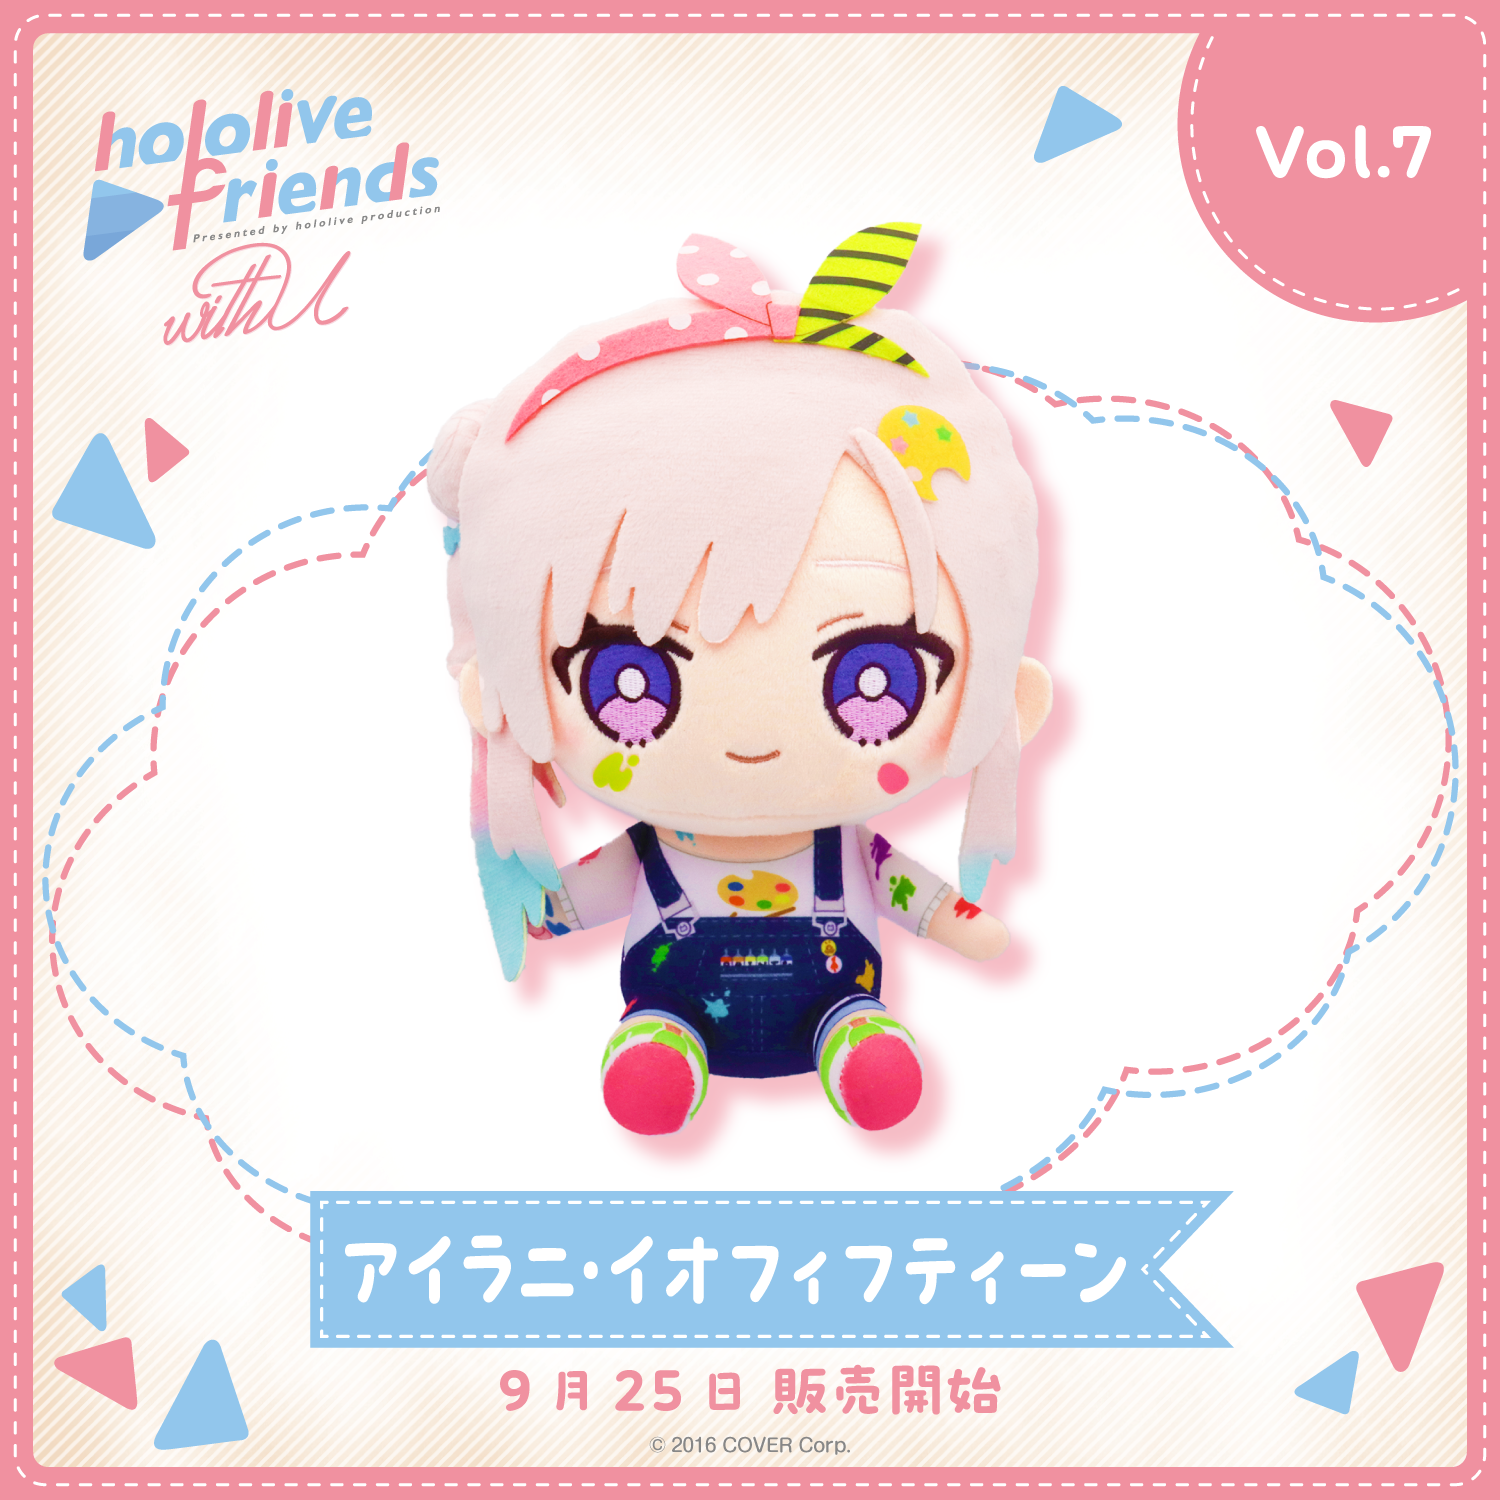 hololive friends with u アイラニ・イオフィフティーン – hololive ...